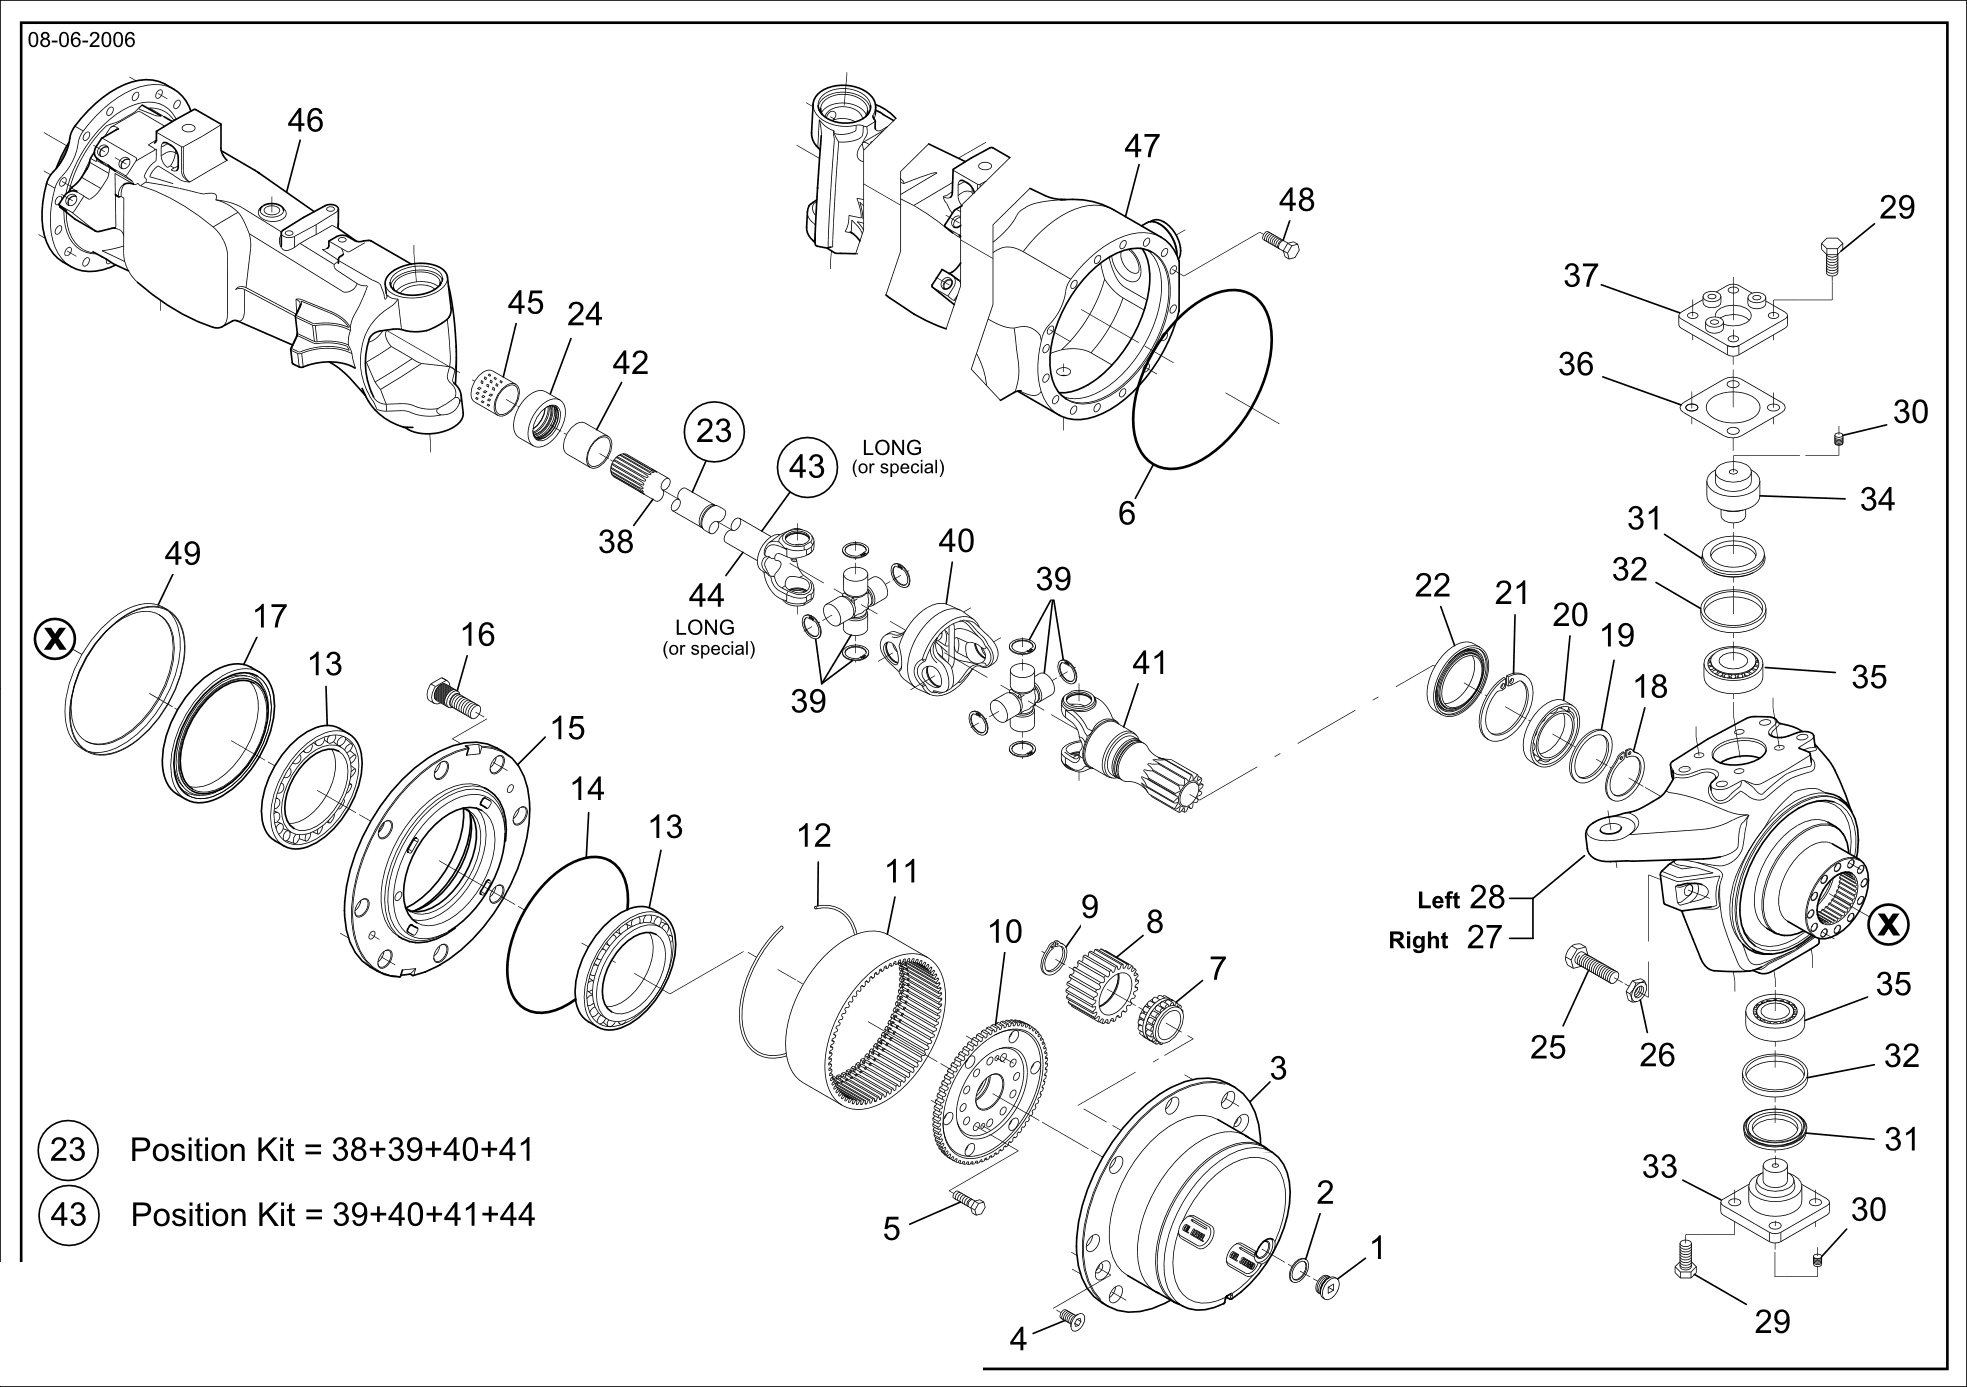 drawing for CNH NEW HOLLAND 1-33-741-014 - PIN